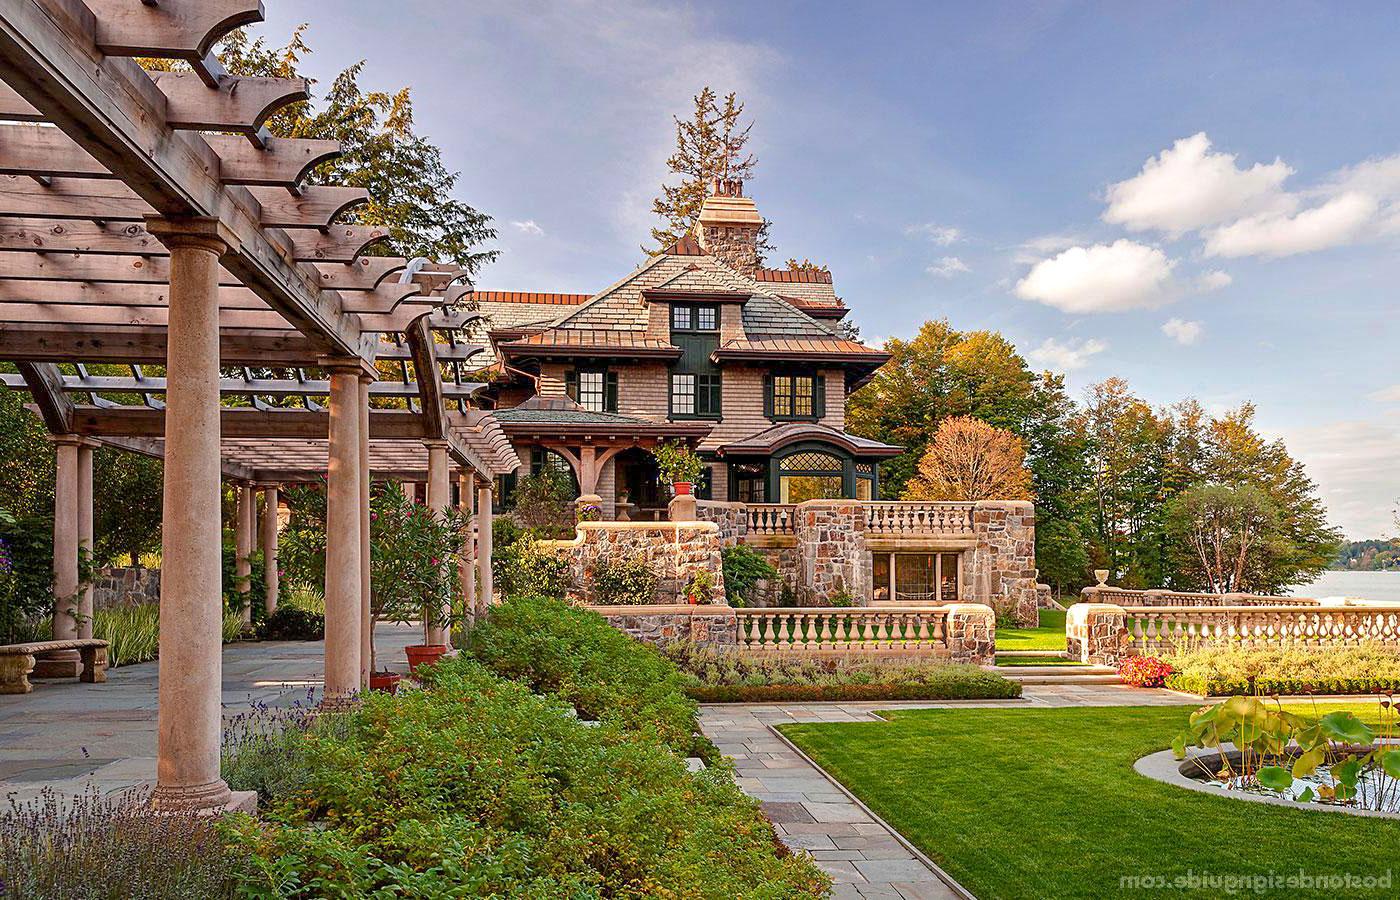 New York estate with a perfect pergola designed by Meyer & Meyer Architecture and Interiors